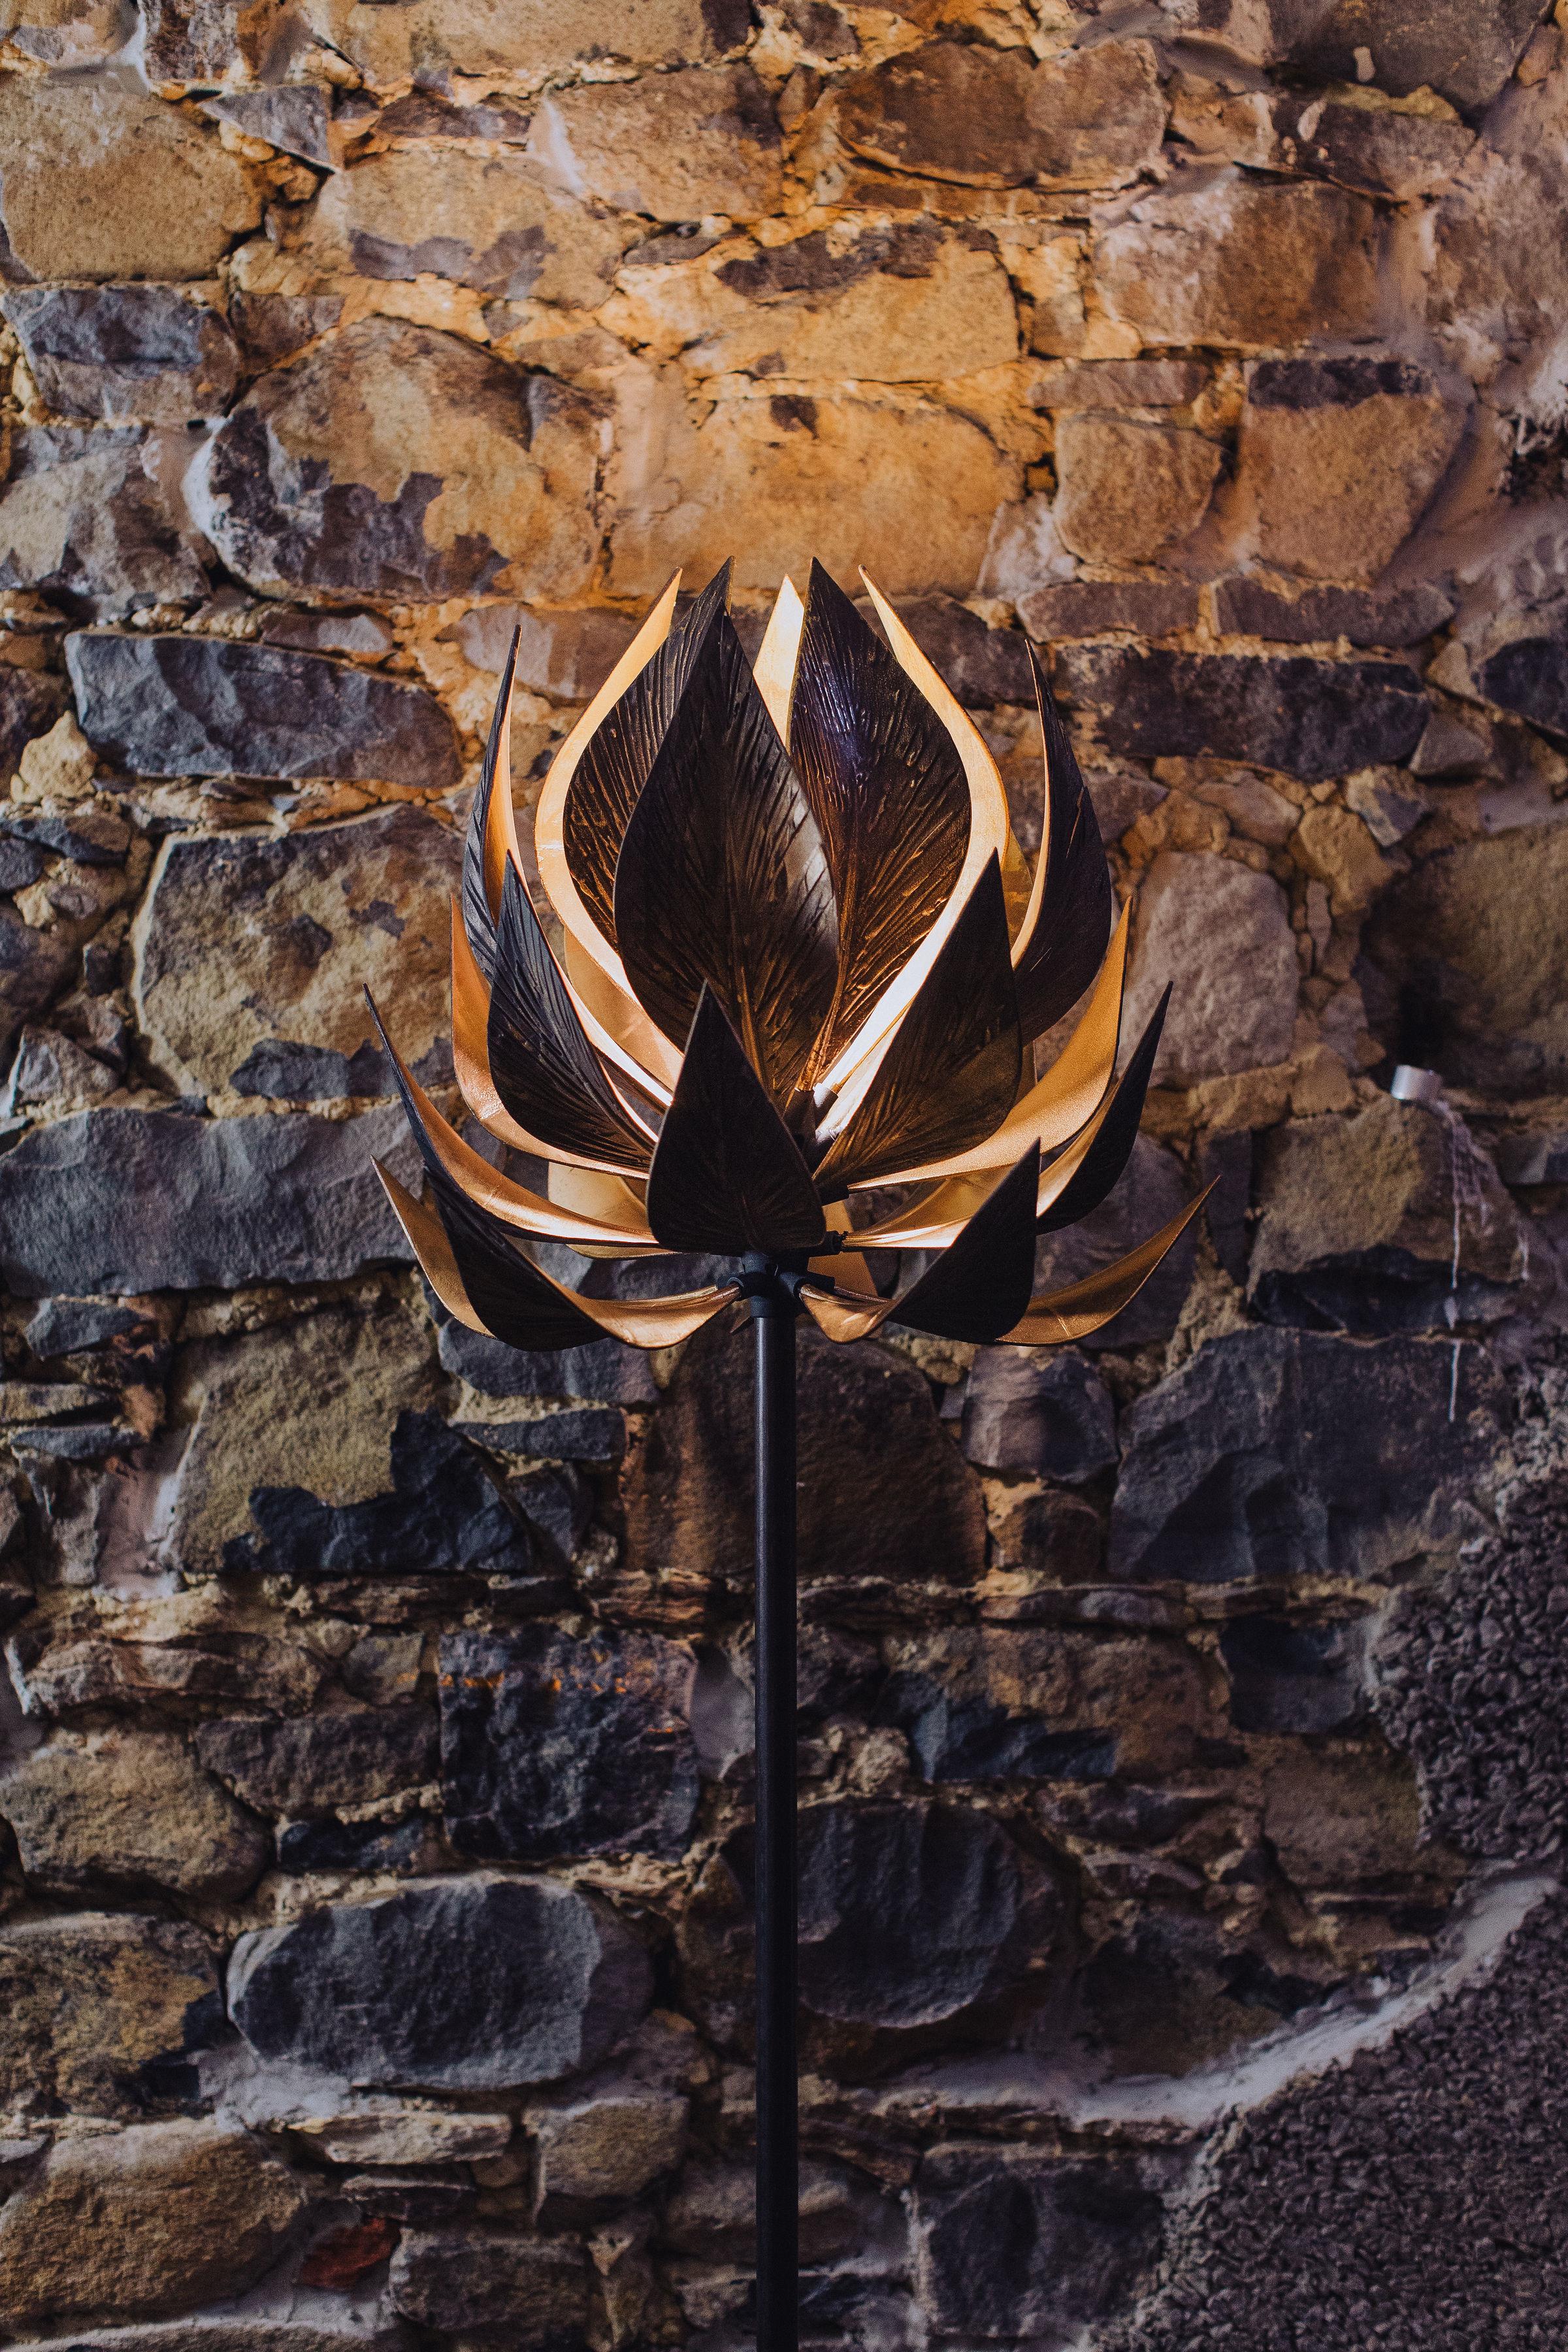 Combining the highest quality materials, the Lotus Standing Light boasts a harmonious blend of ABS polymer and electro-plated bronze for each of the 25 leaves, infusing it with a luxurious aesthetic that is as eye-catching as it is durable. The cast